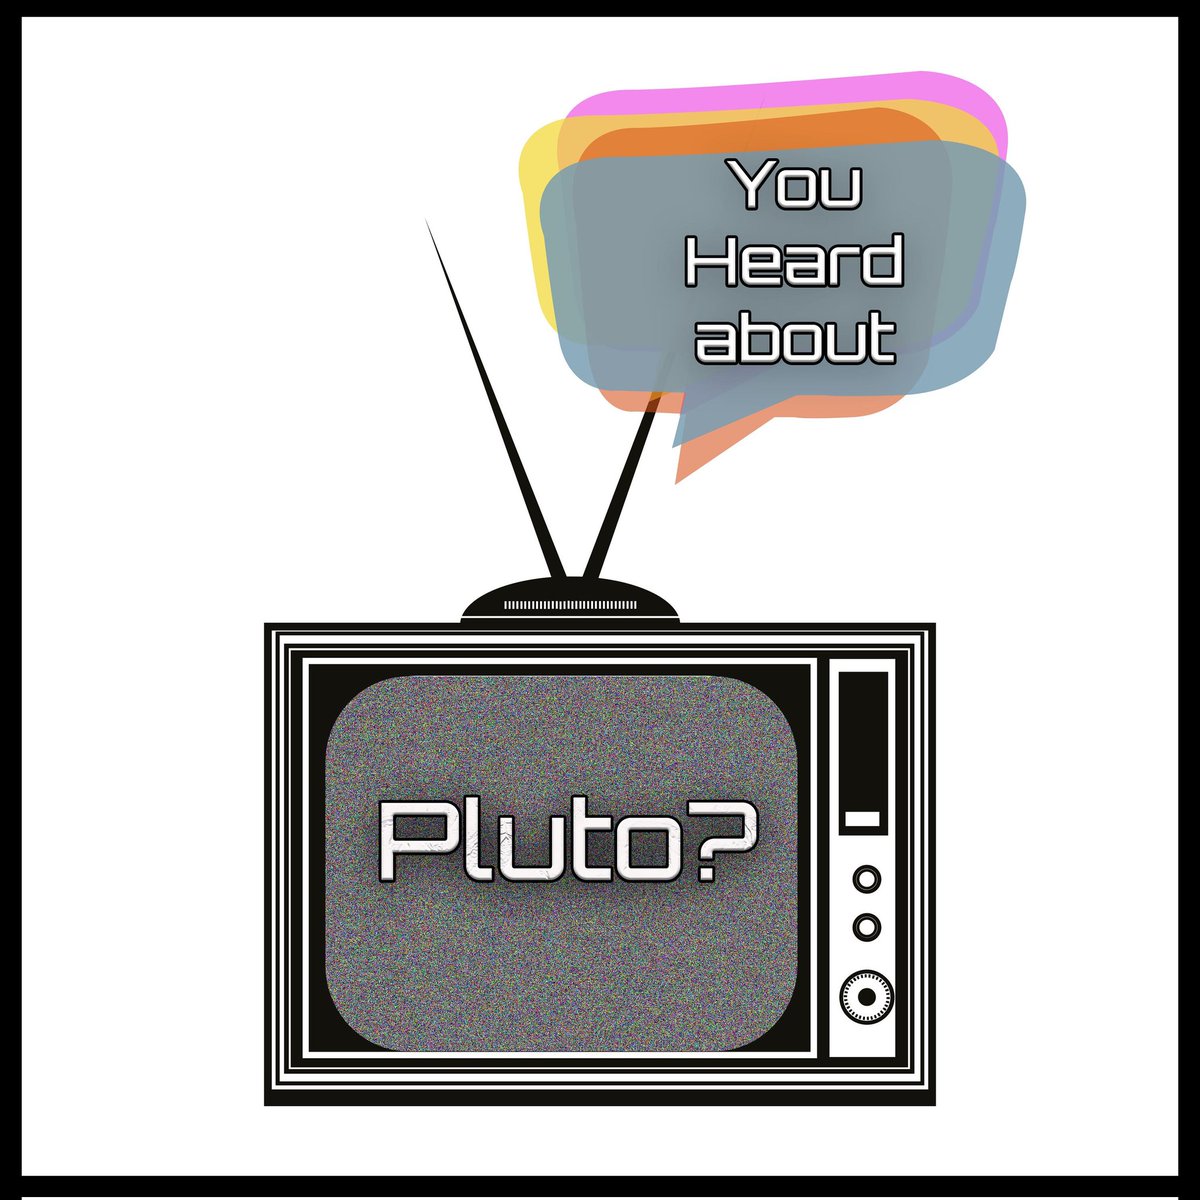 In this edition of You Heard About @PlutoTV, Jenny welcomes guest @msouza1991 to watch MXC and talk Spike TV, Vic Romano and Kenny Blankenship, Santa's balls, gross water, dangerous stunts, trash pizza ratings, Carvana, Matt's color blindness & much more! 
https://t.co/74mMJLOLWe https://t.co/MsWA3Nylo5